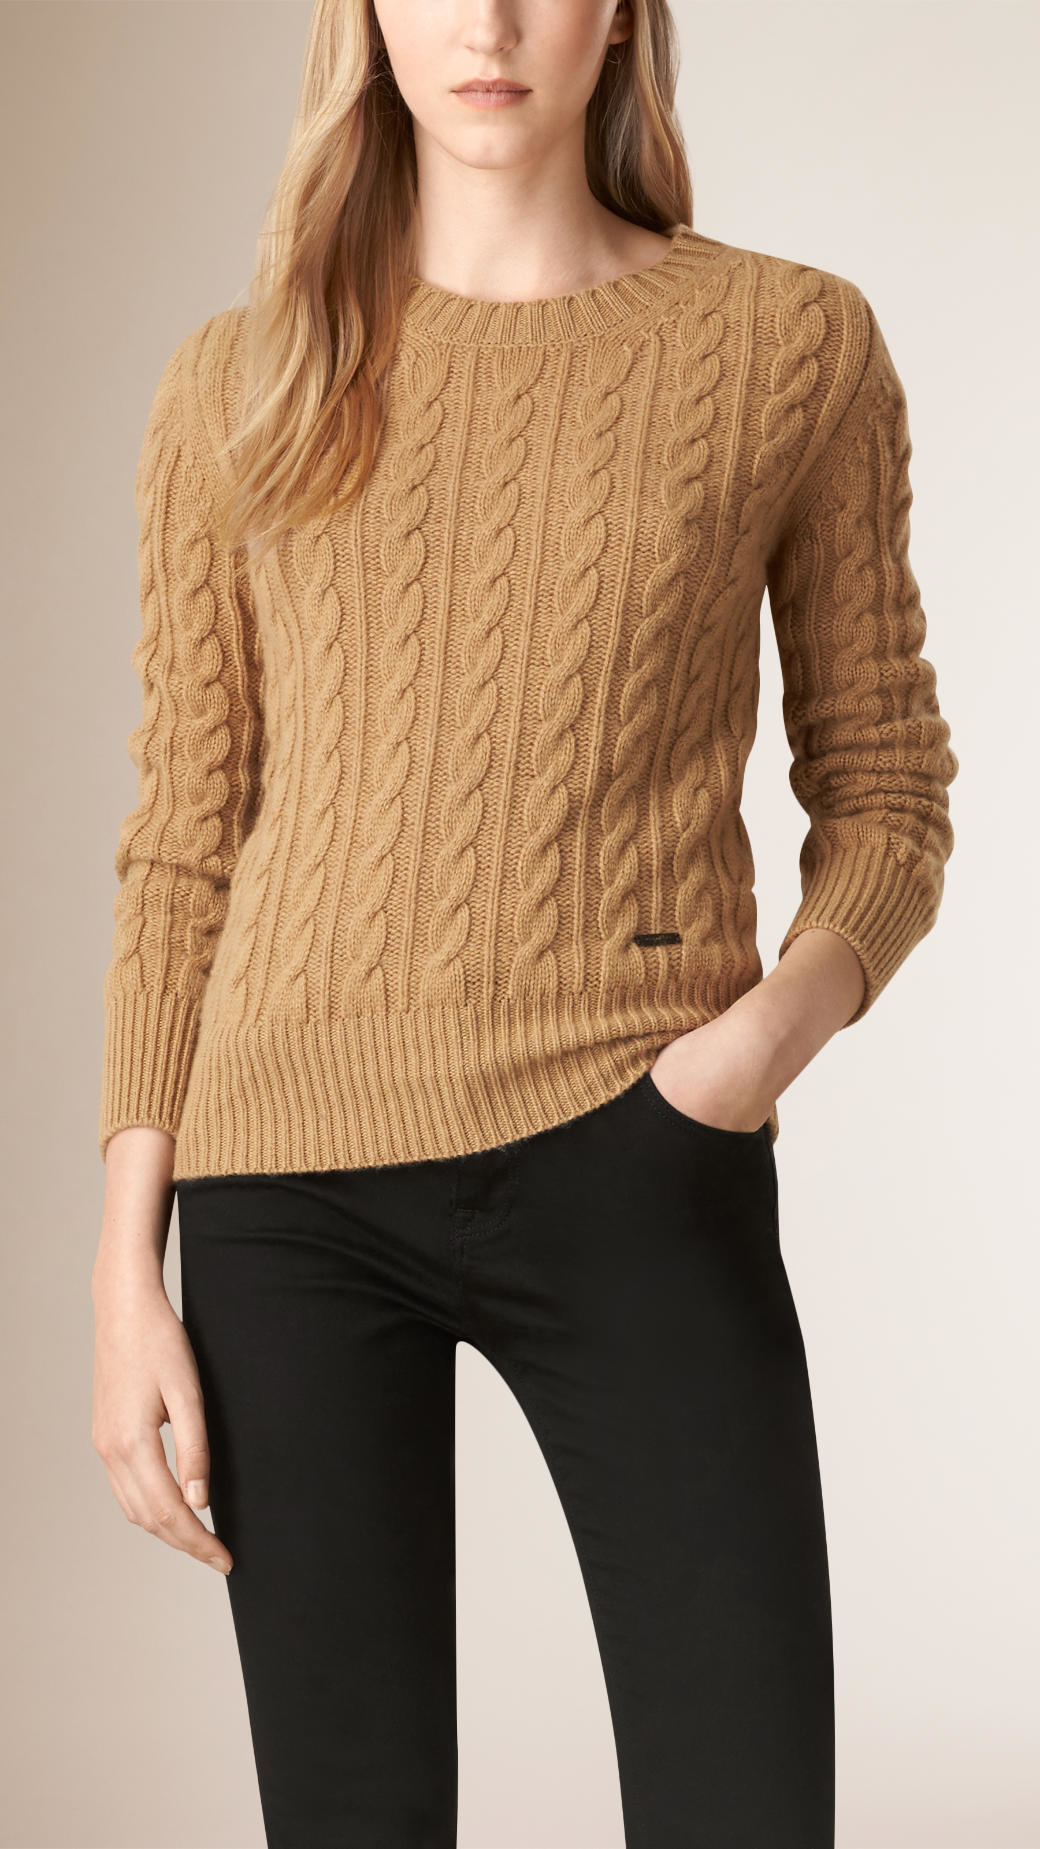 Lyst - Burberry Cable Knit Wool Cashmere Sweater Camel in Natural